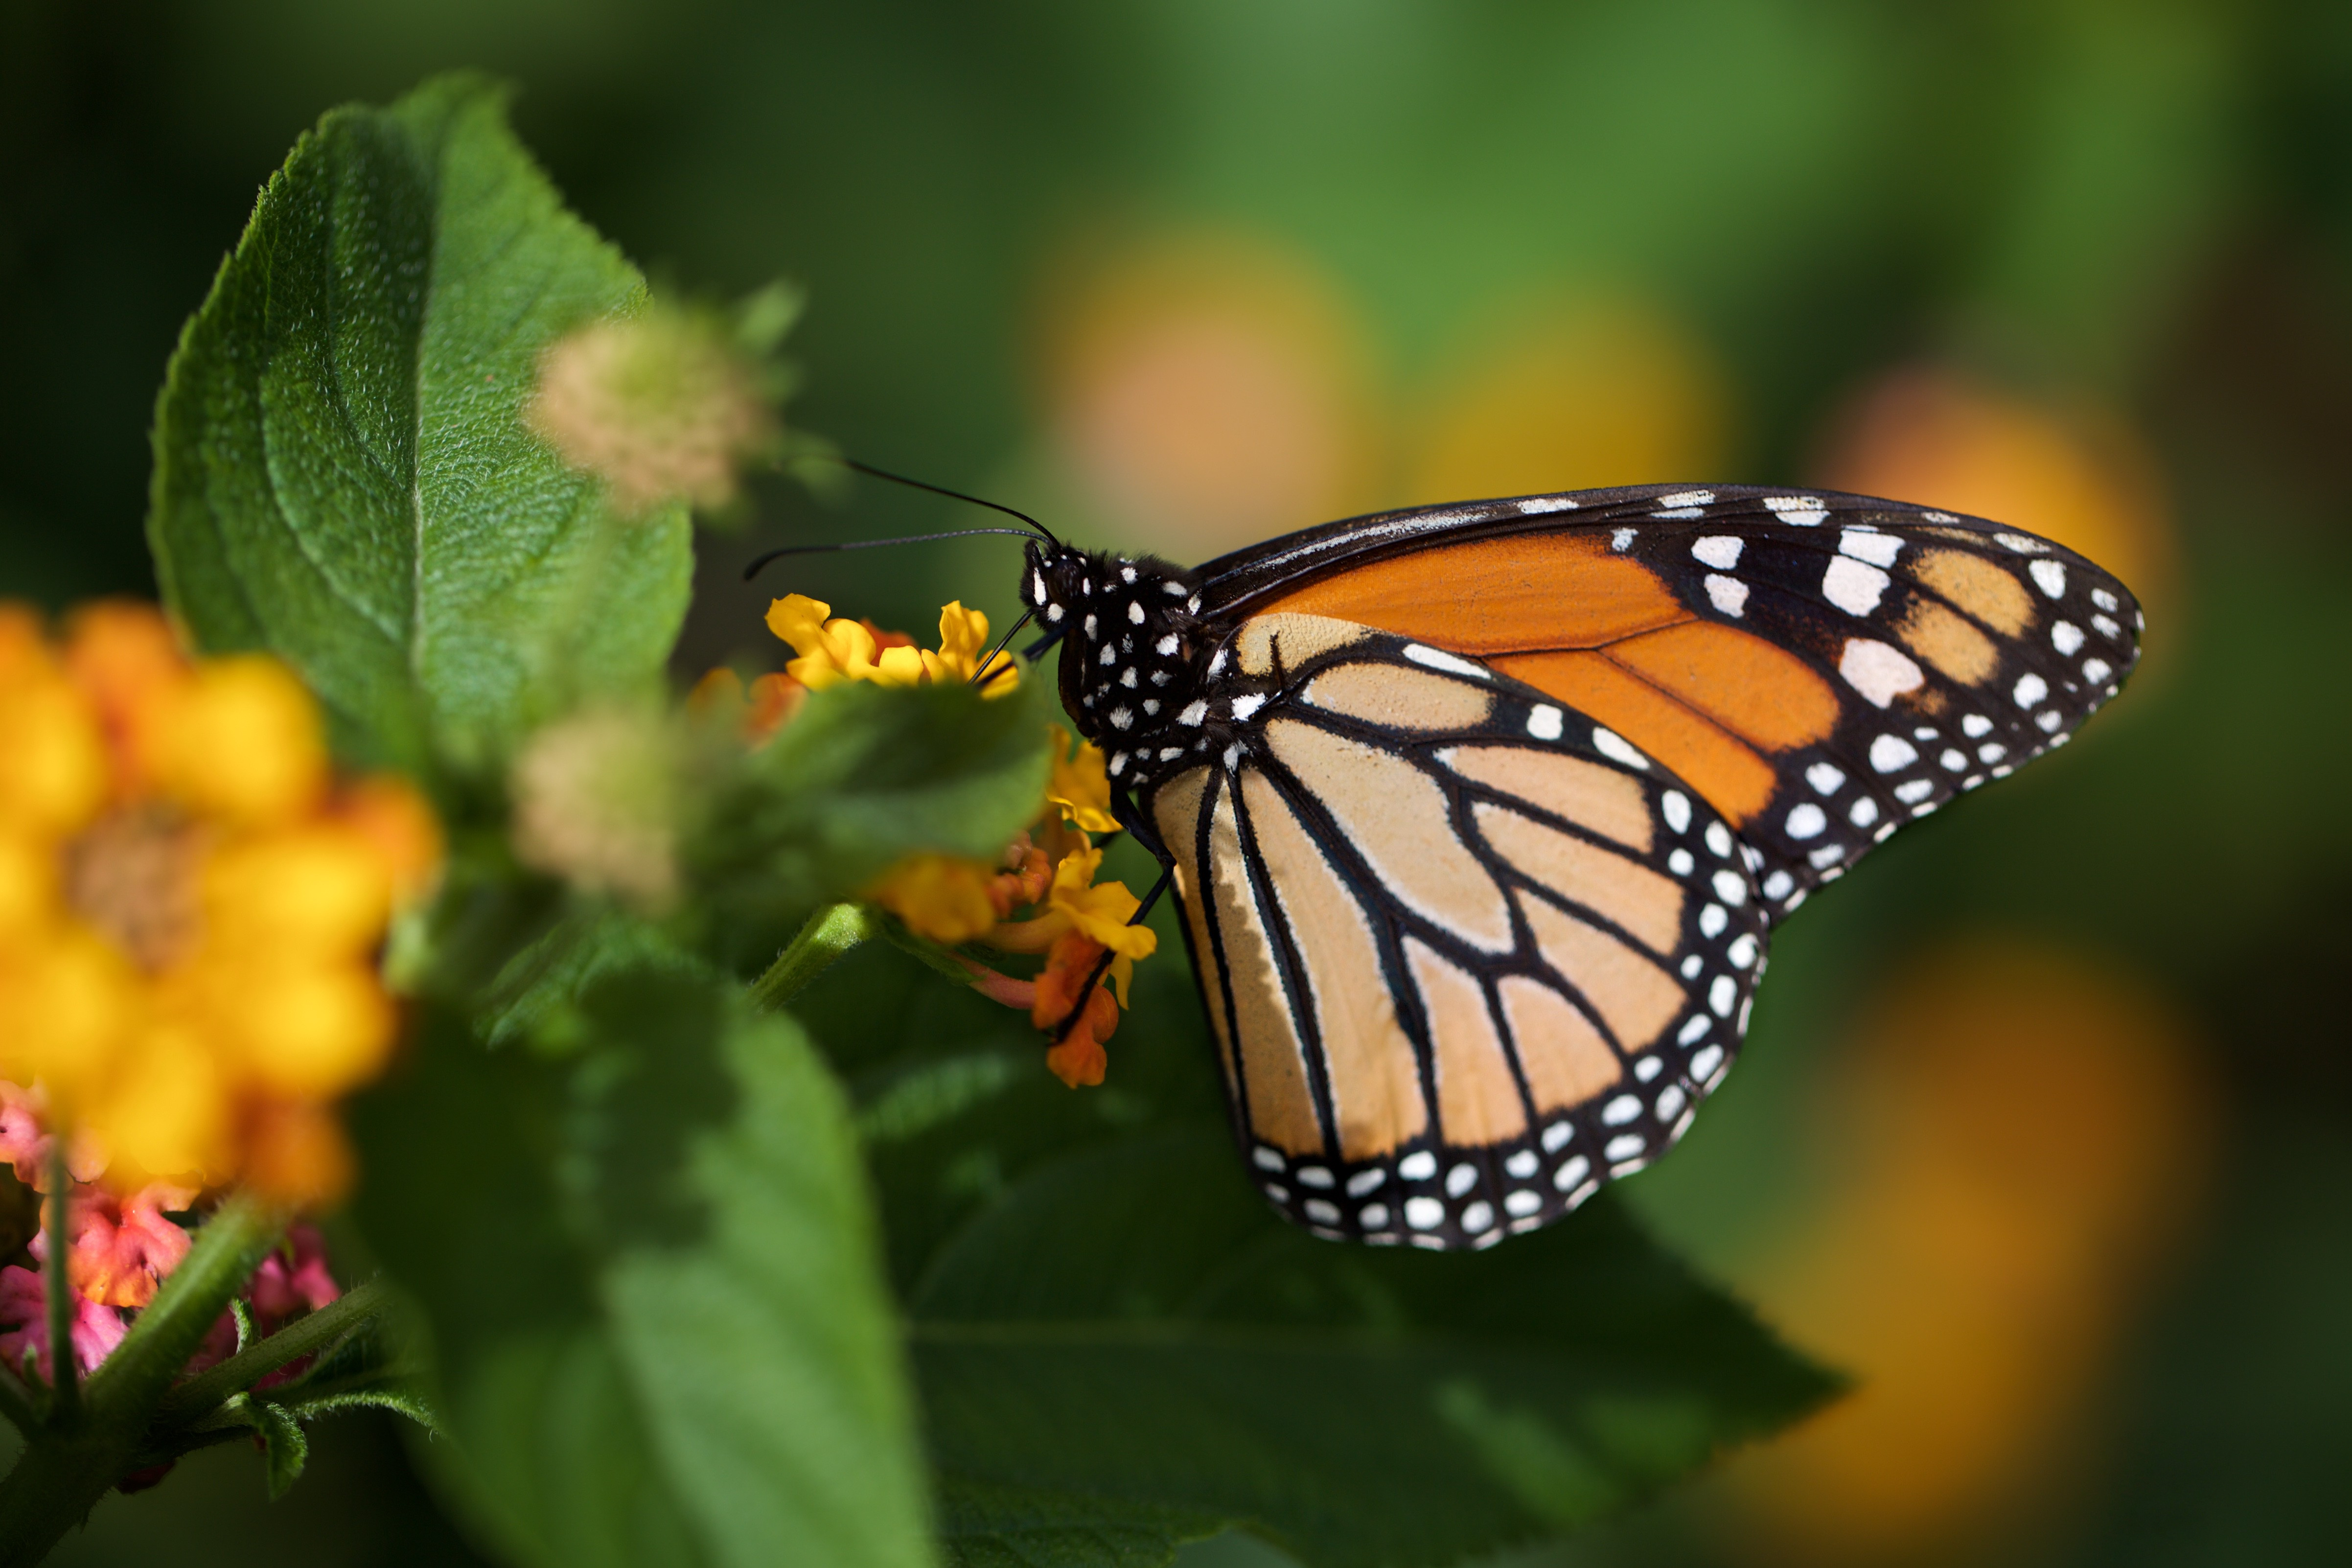 Wallpapers animals monarch butterfly insects on the desktop